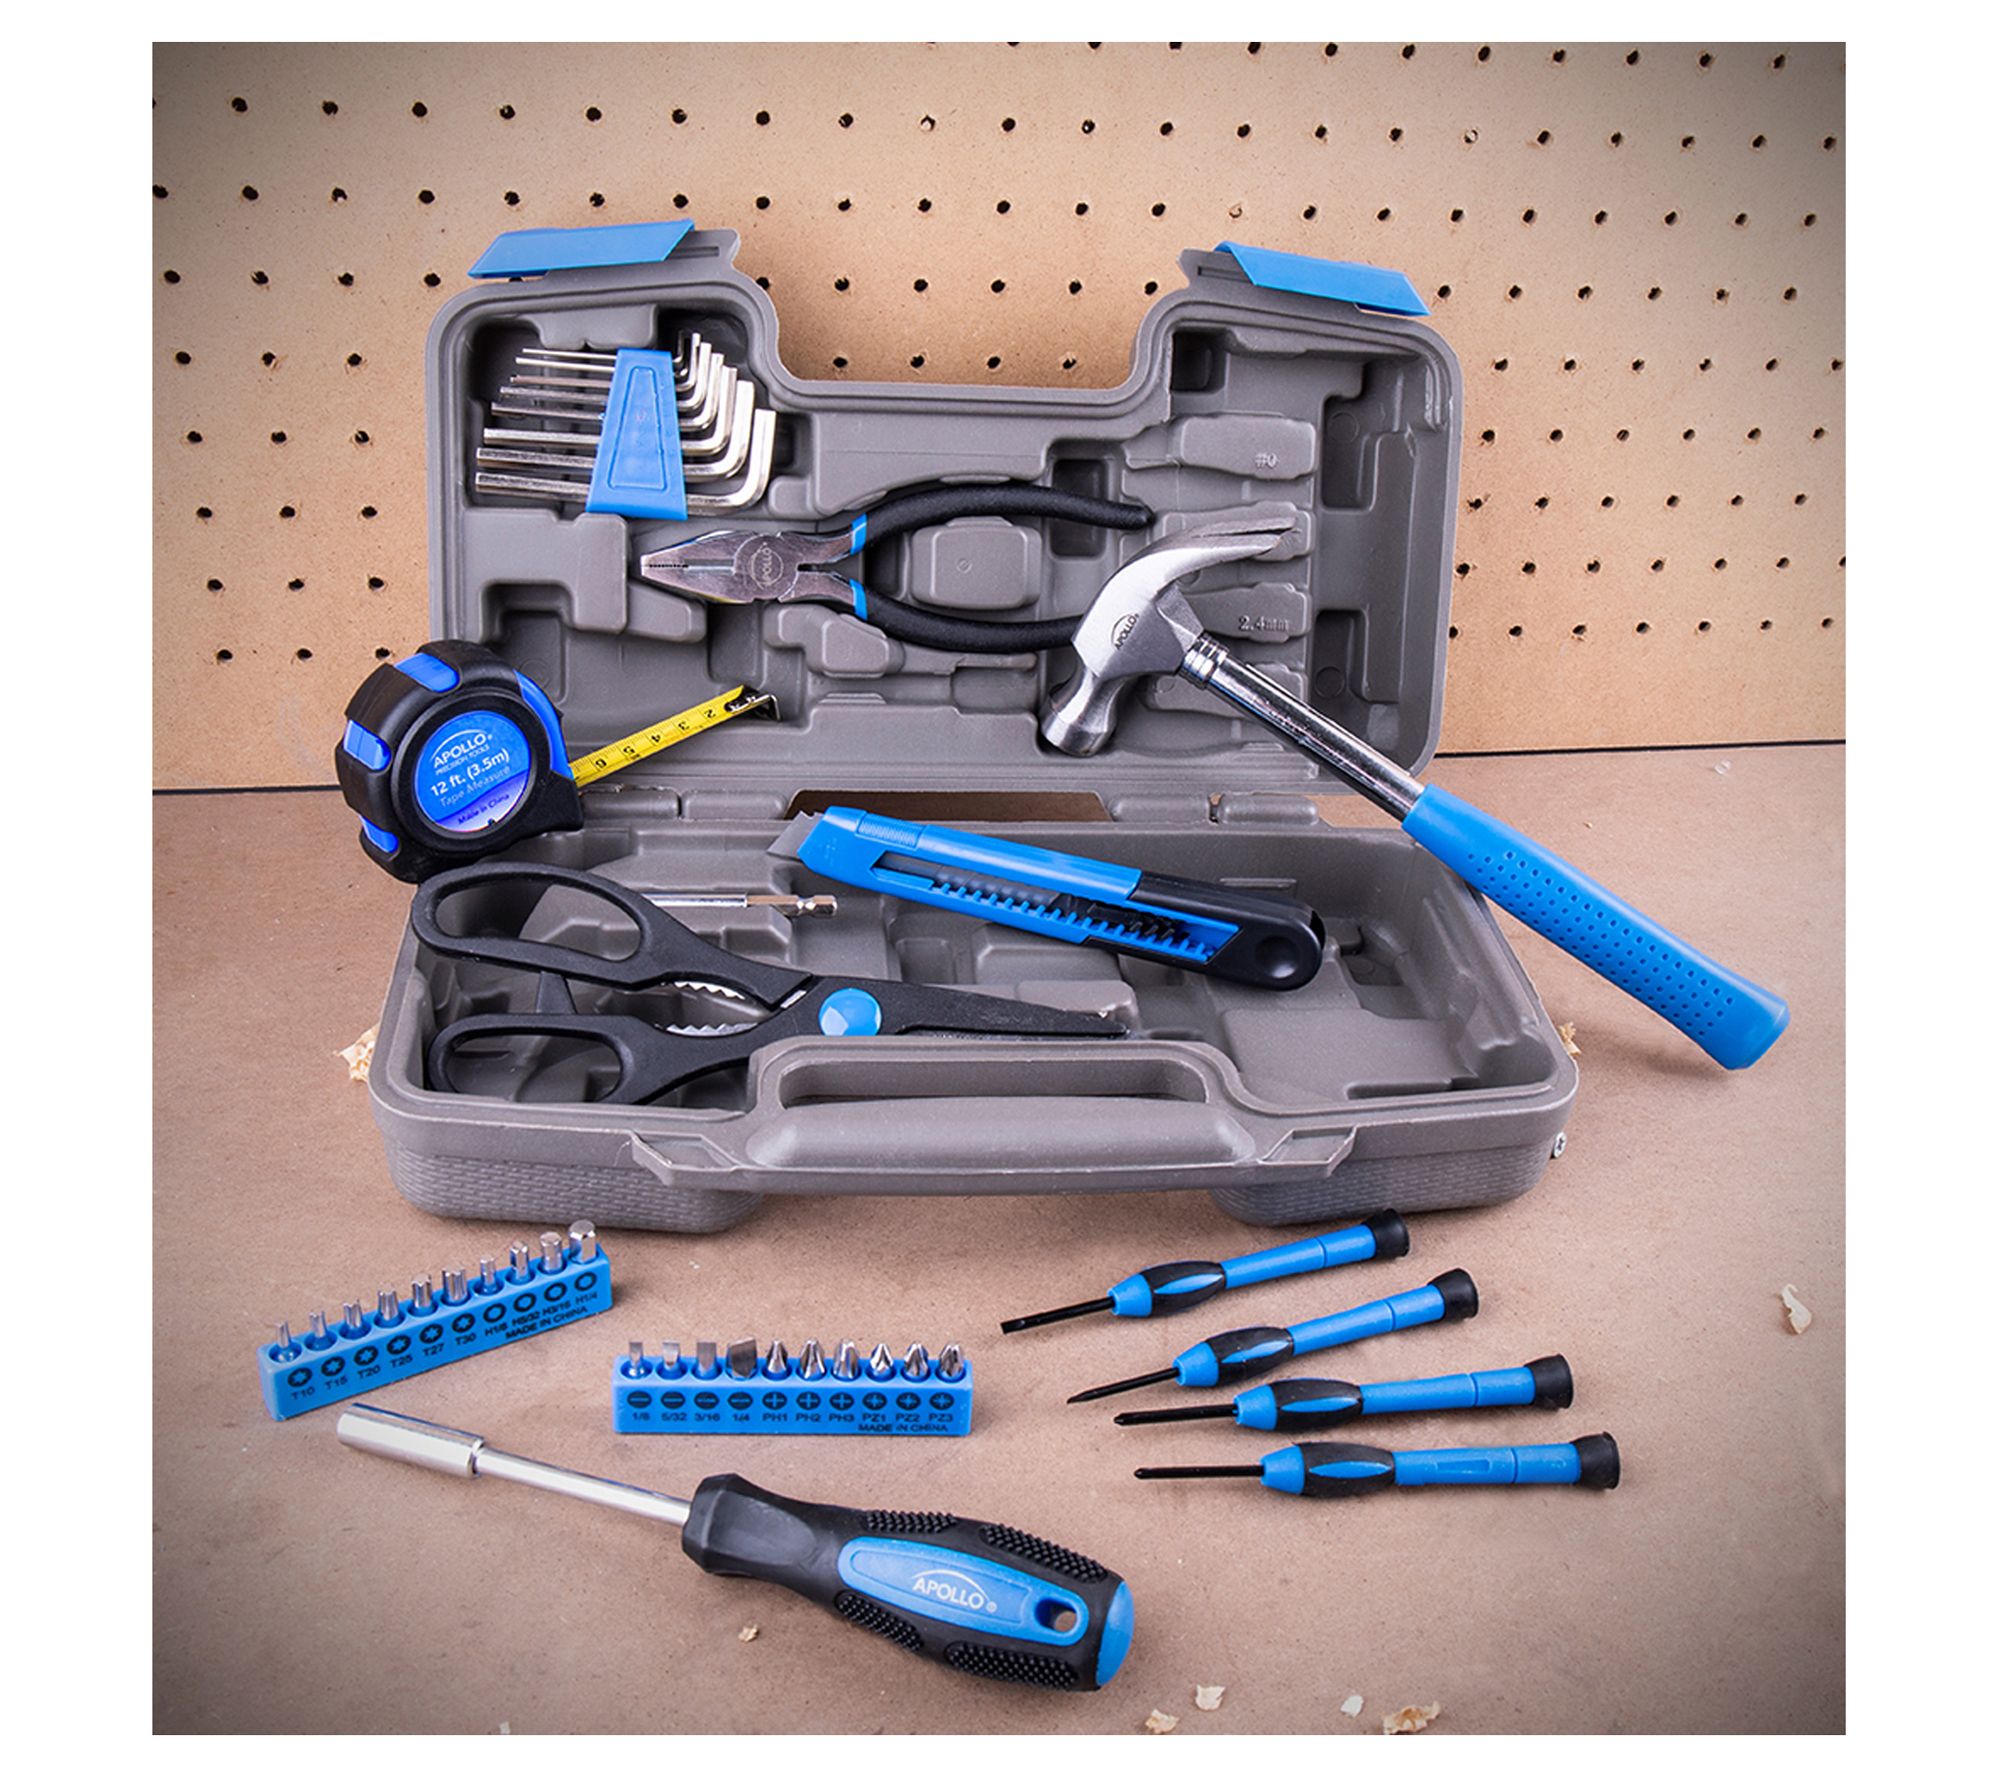 Complete Household tool Kit in case 144 pieces with 4.8V Cordless